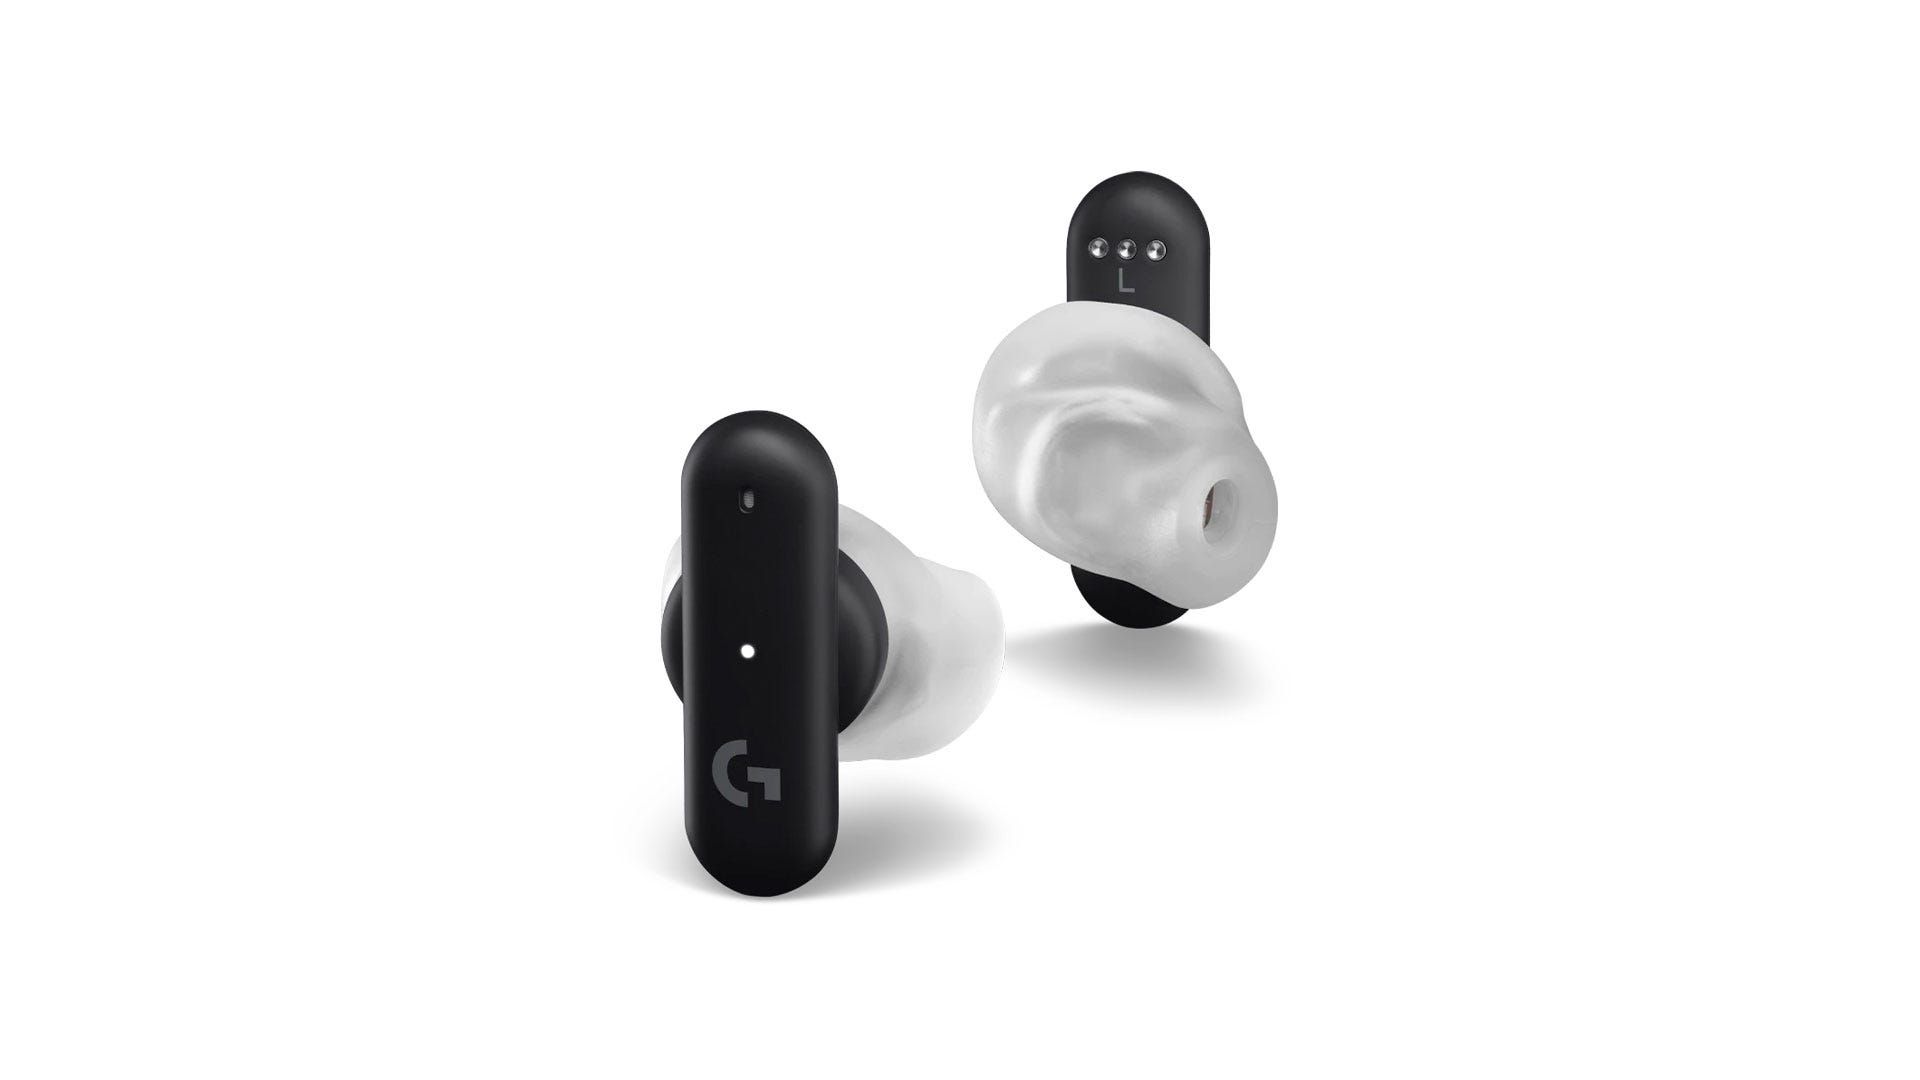 Logitech-G-Fits-earbuds-on-a-white-background